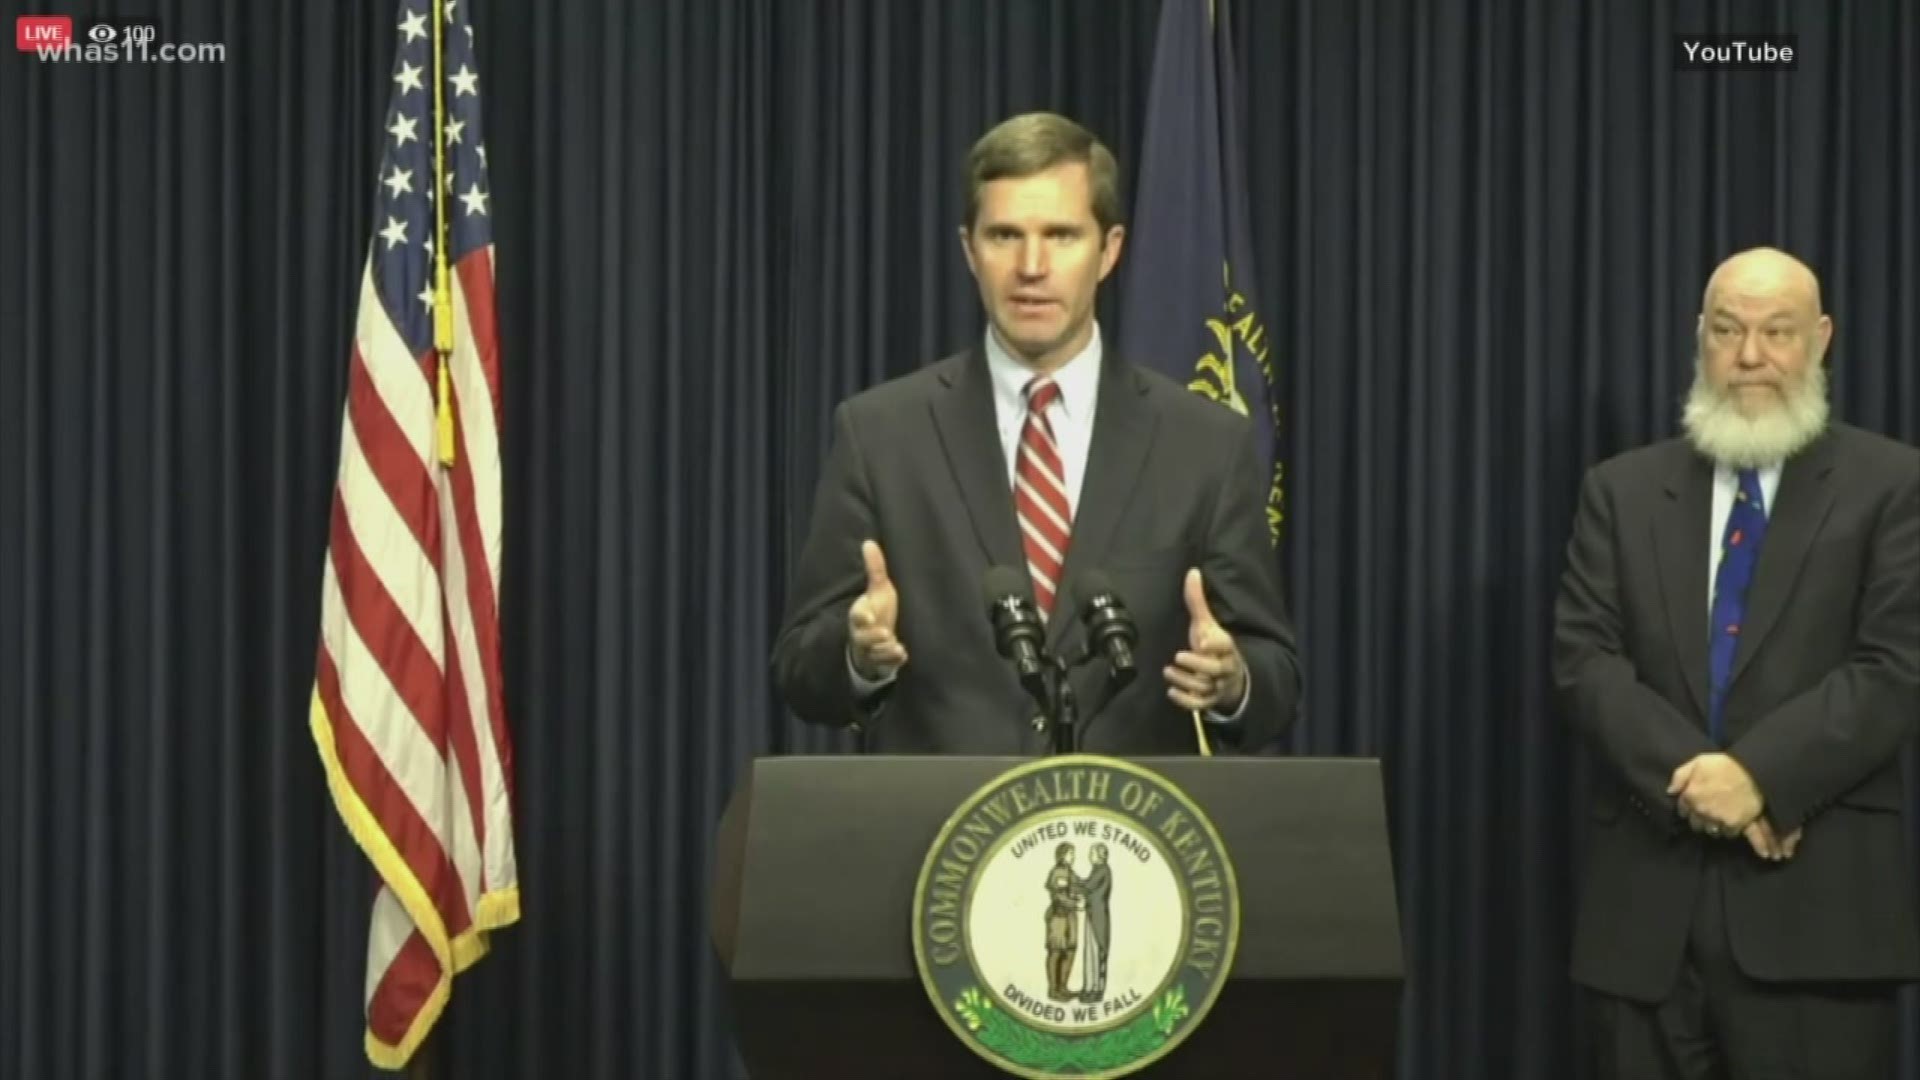 Beshear made the announcement this afternoon at the state capitol in Frankfort